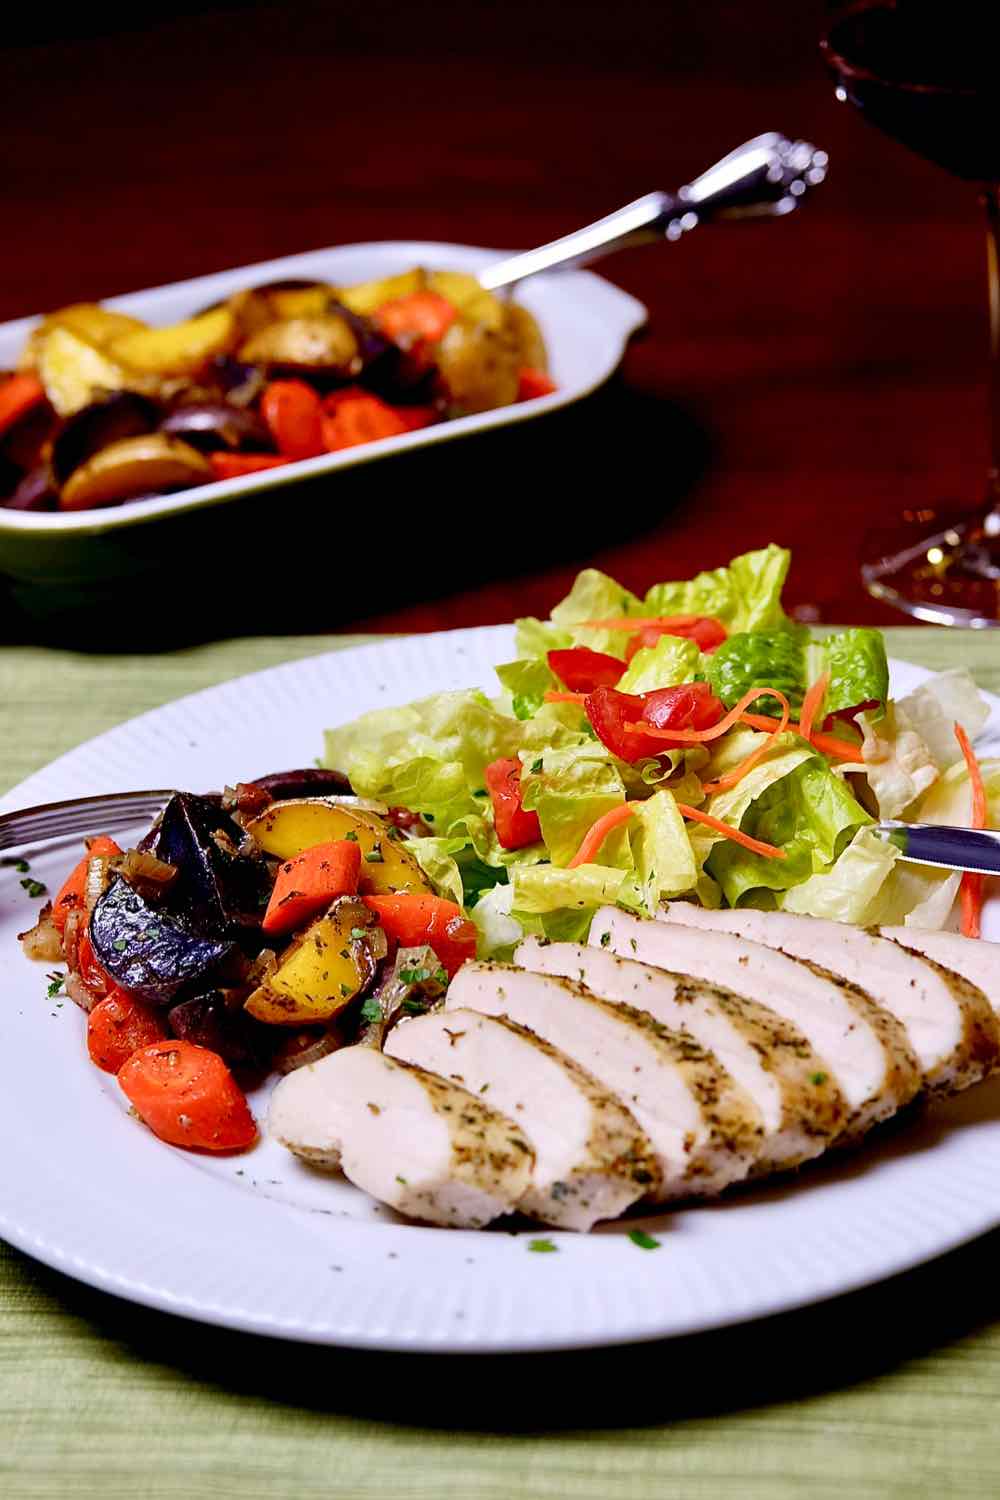 Lemon-Herb Roasted Chicken with Colorful Baby Potatoes and Carrots and salad on a white plate.  Wine glass and serving dish with additional potatoes in background.